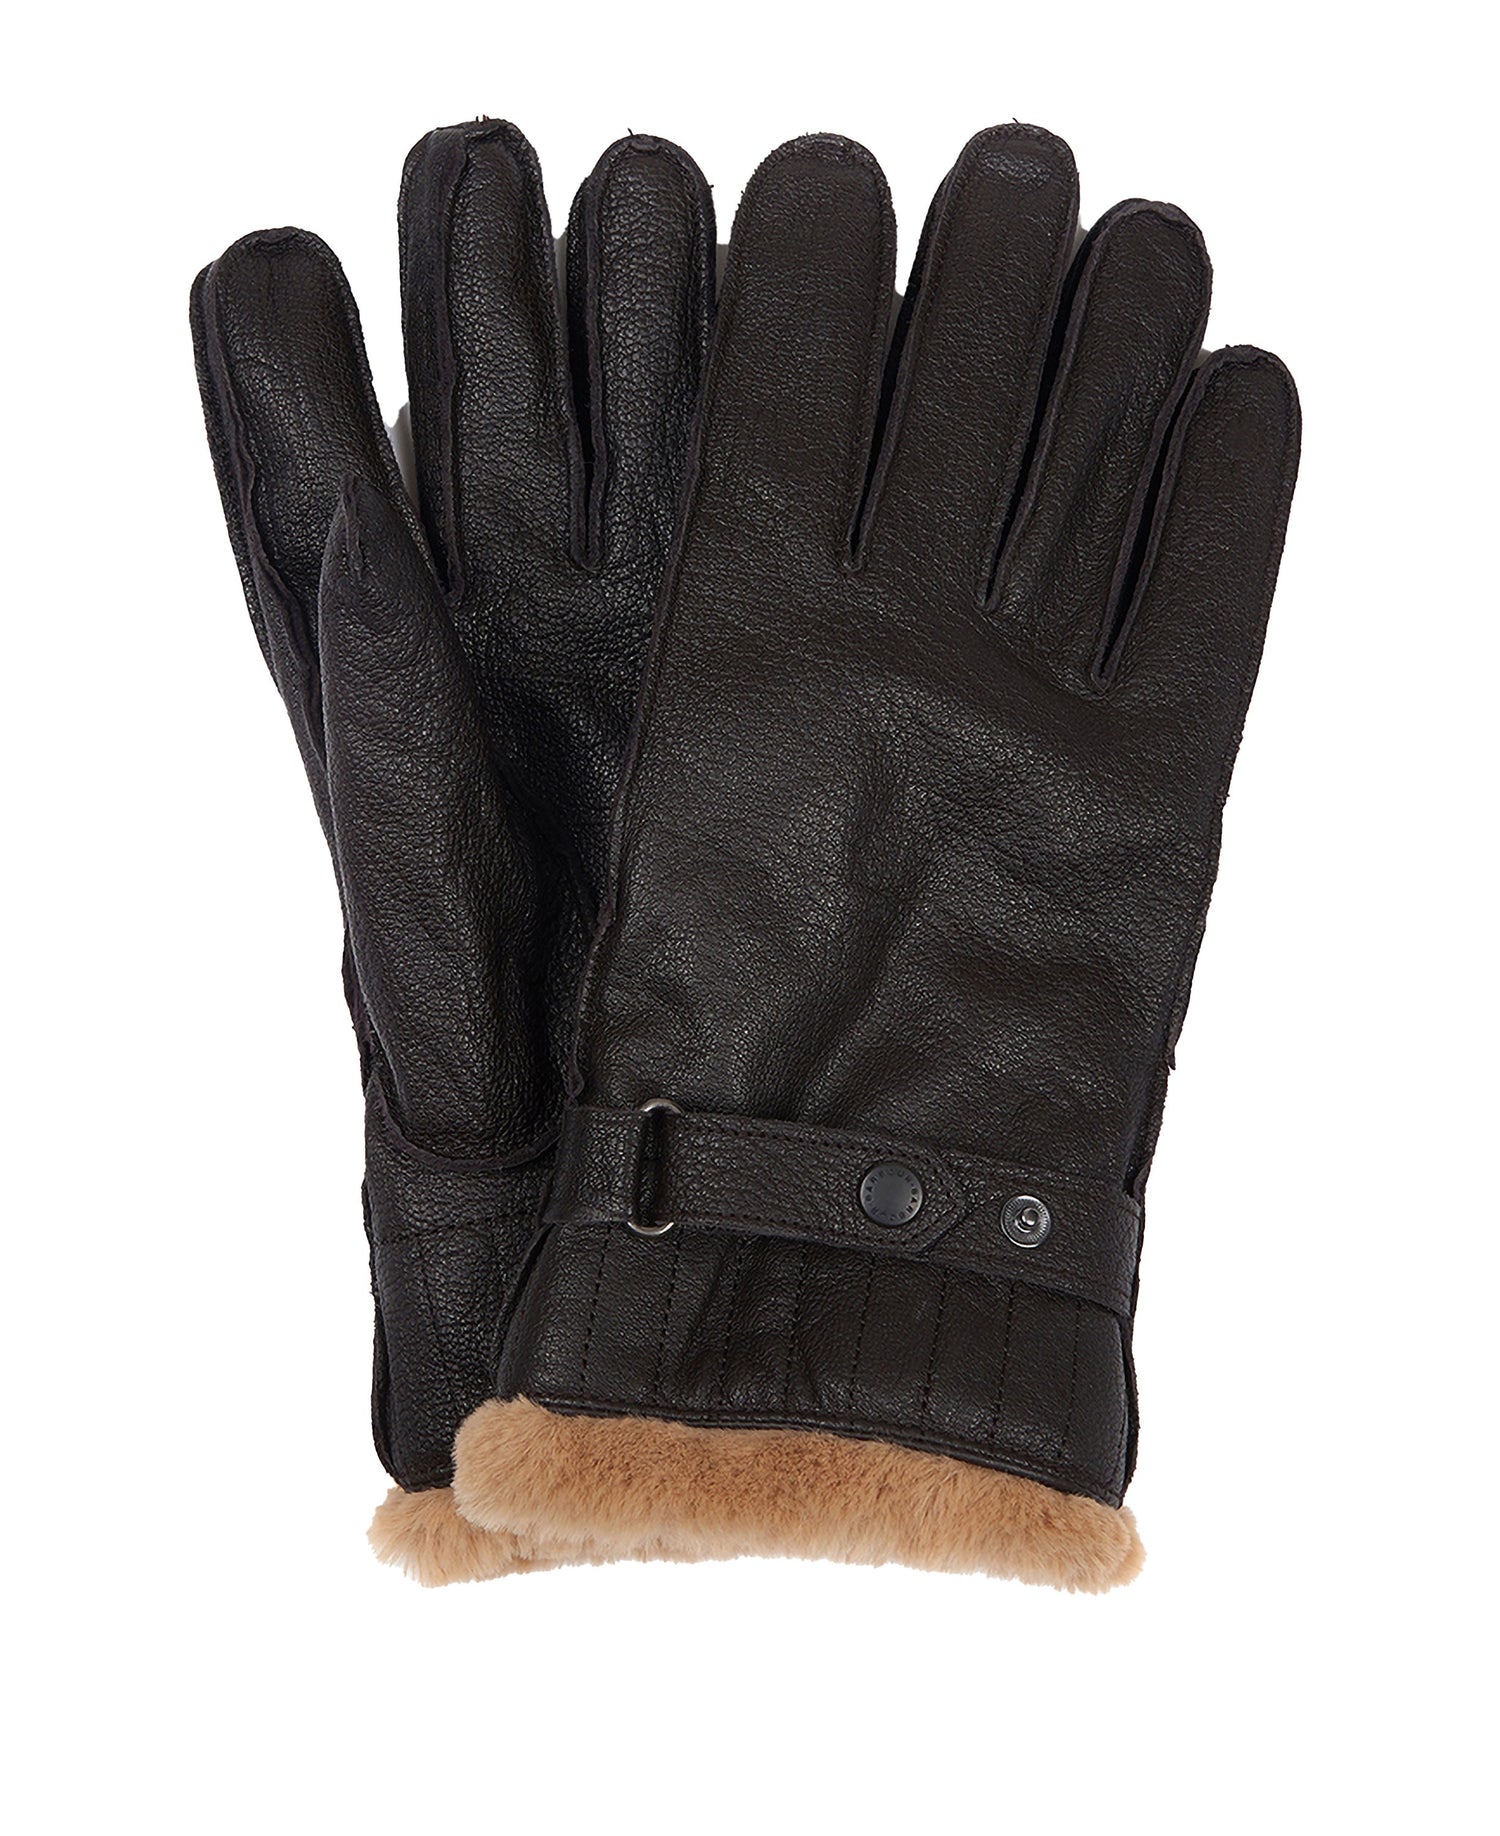 Leather Utility Gloves - Brown